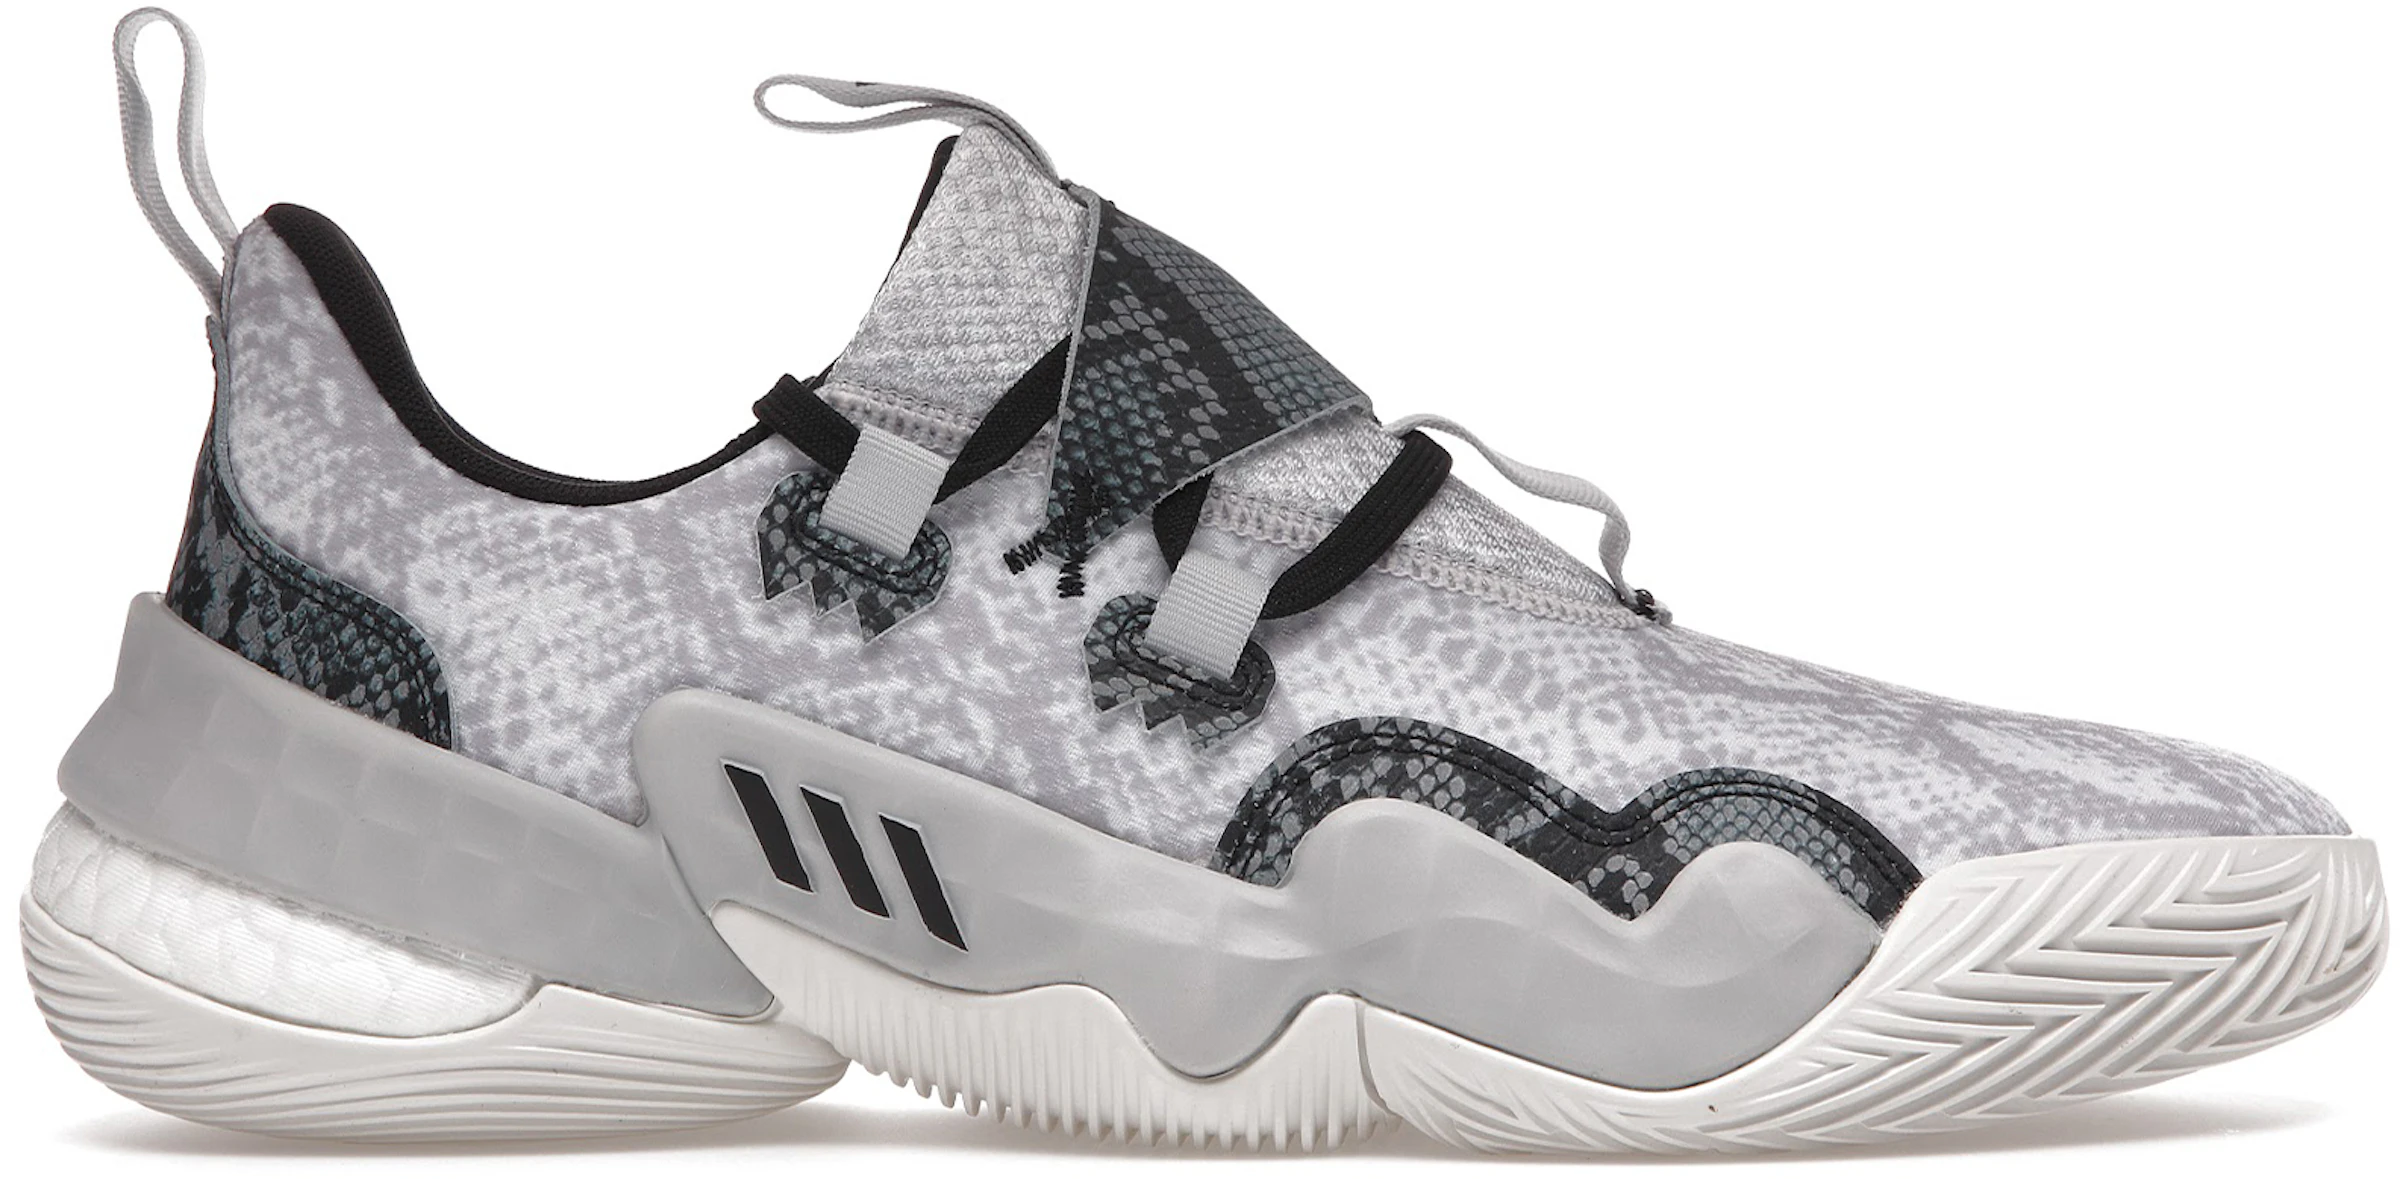 adidas Trae Young 1 Light Solid Grey Snakeskin - H67753 - US